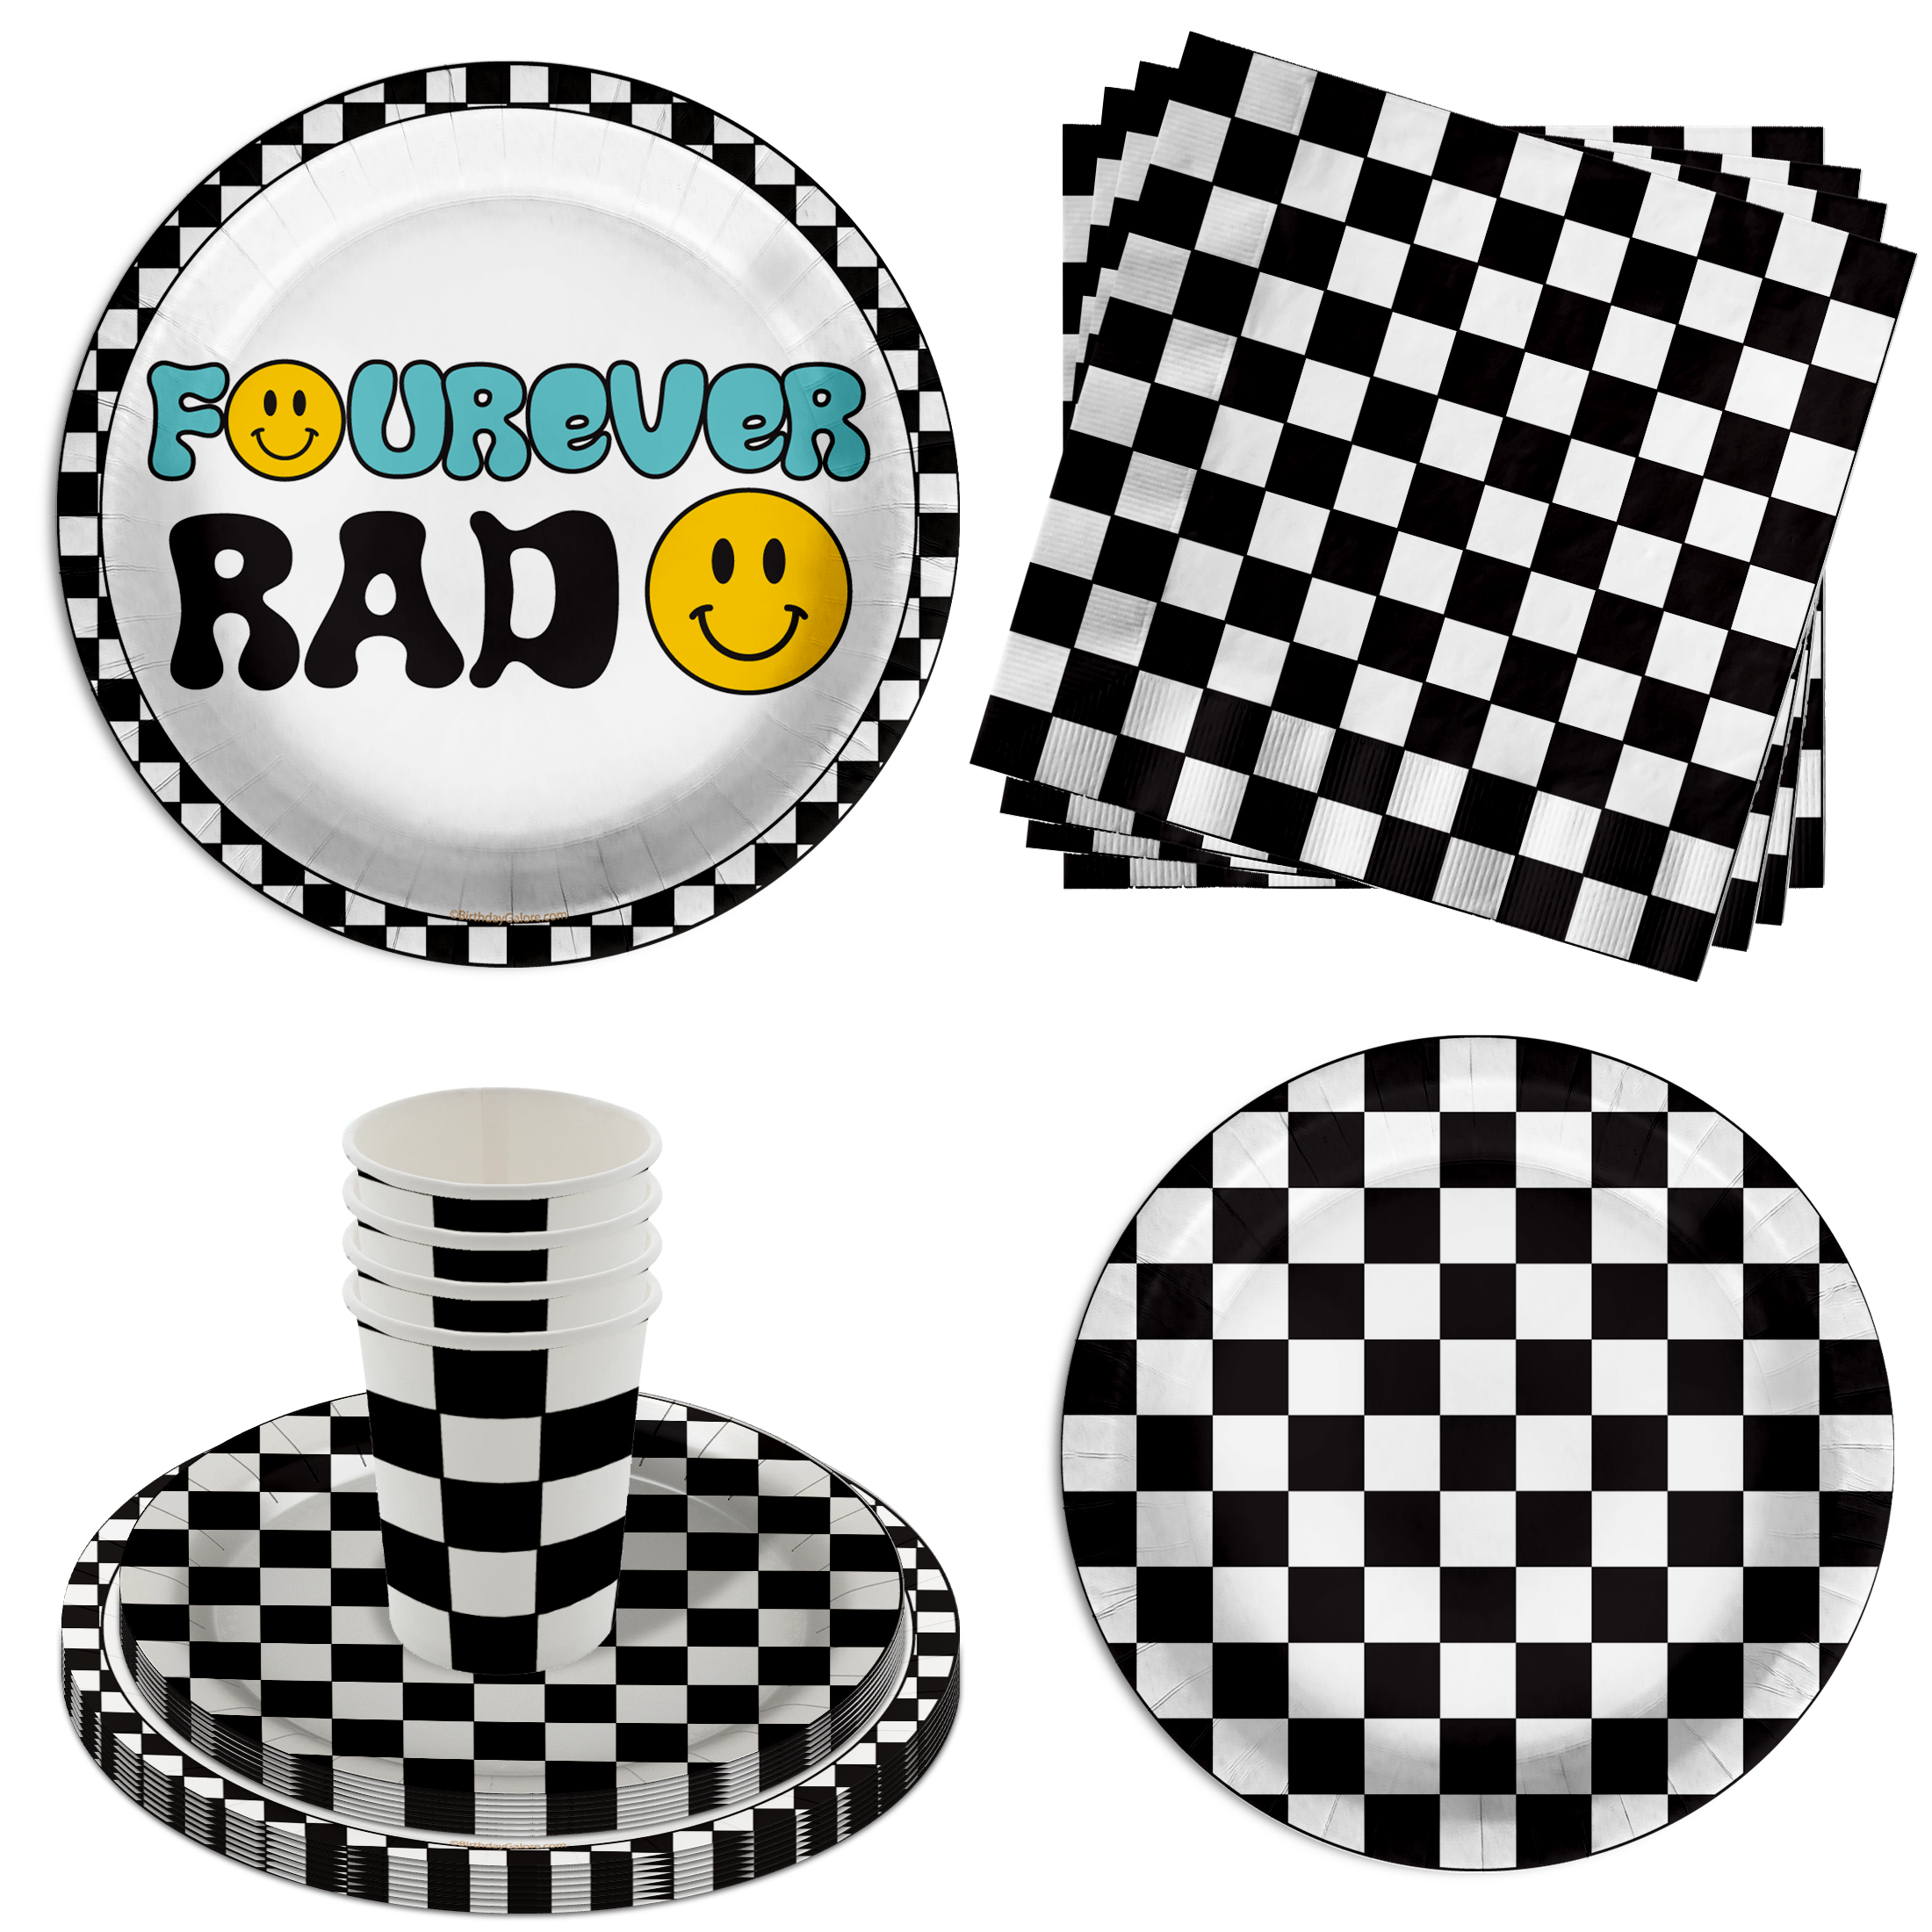 Fourever Rad Smiley Face 4th Birthday Party Supplies 64 Piece Tableware Set Includes Large 9" Dinner Plate and Small Dessert Plates Cups and Napkins Tableware Kit for 16